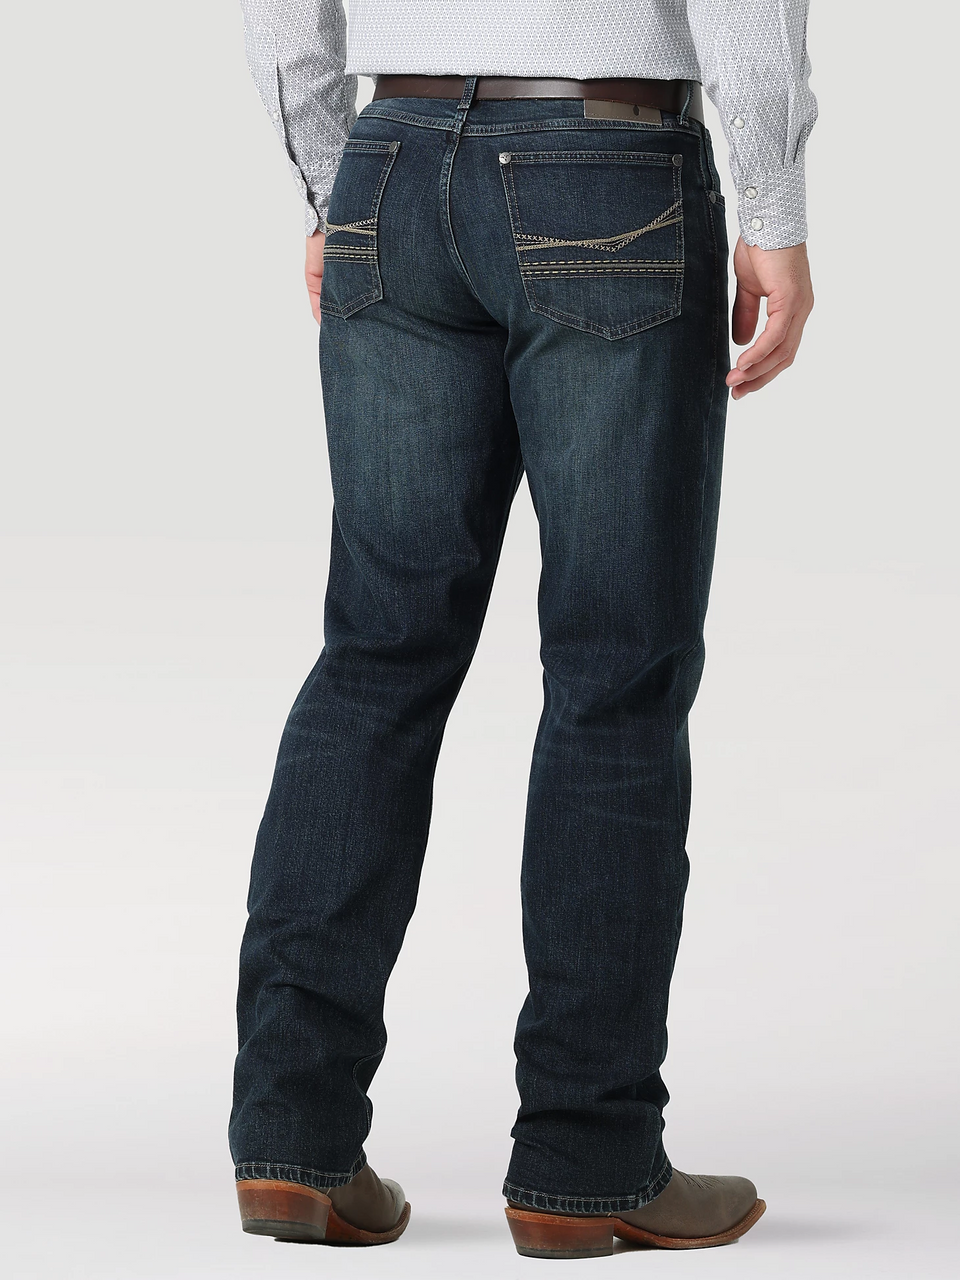 https://cdn11.bigcommerce.com/s-t1n43taf3i/images/stencil/1280x1280/products/43778/152019/Wrangler-Men-s-20X-No.-33-Extreme-Relaxed-Fit-Jean__S_1__04867.1682703501.png?c=2